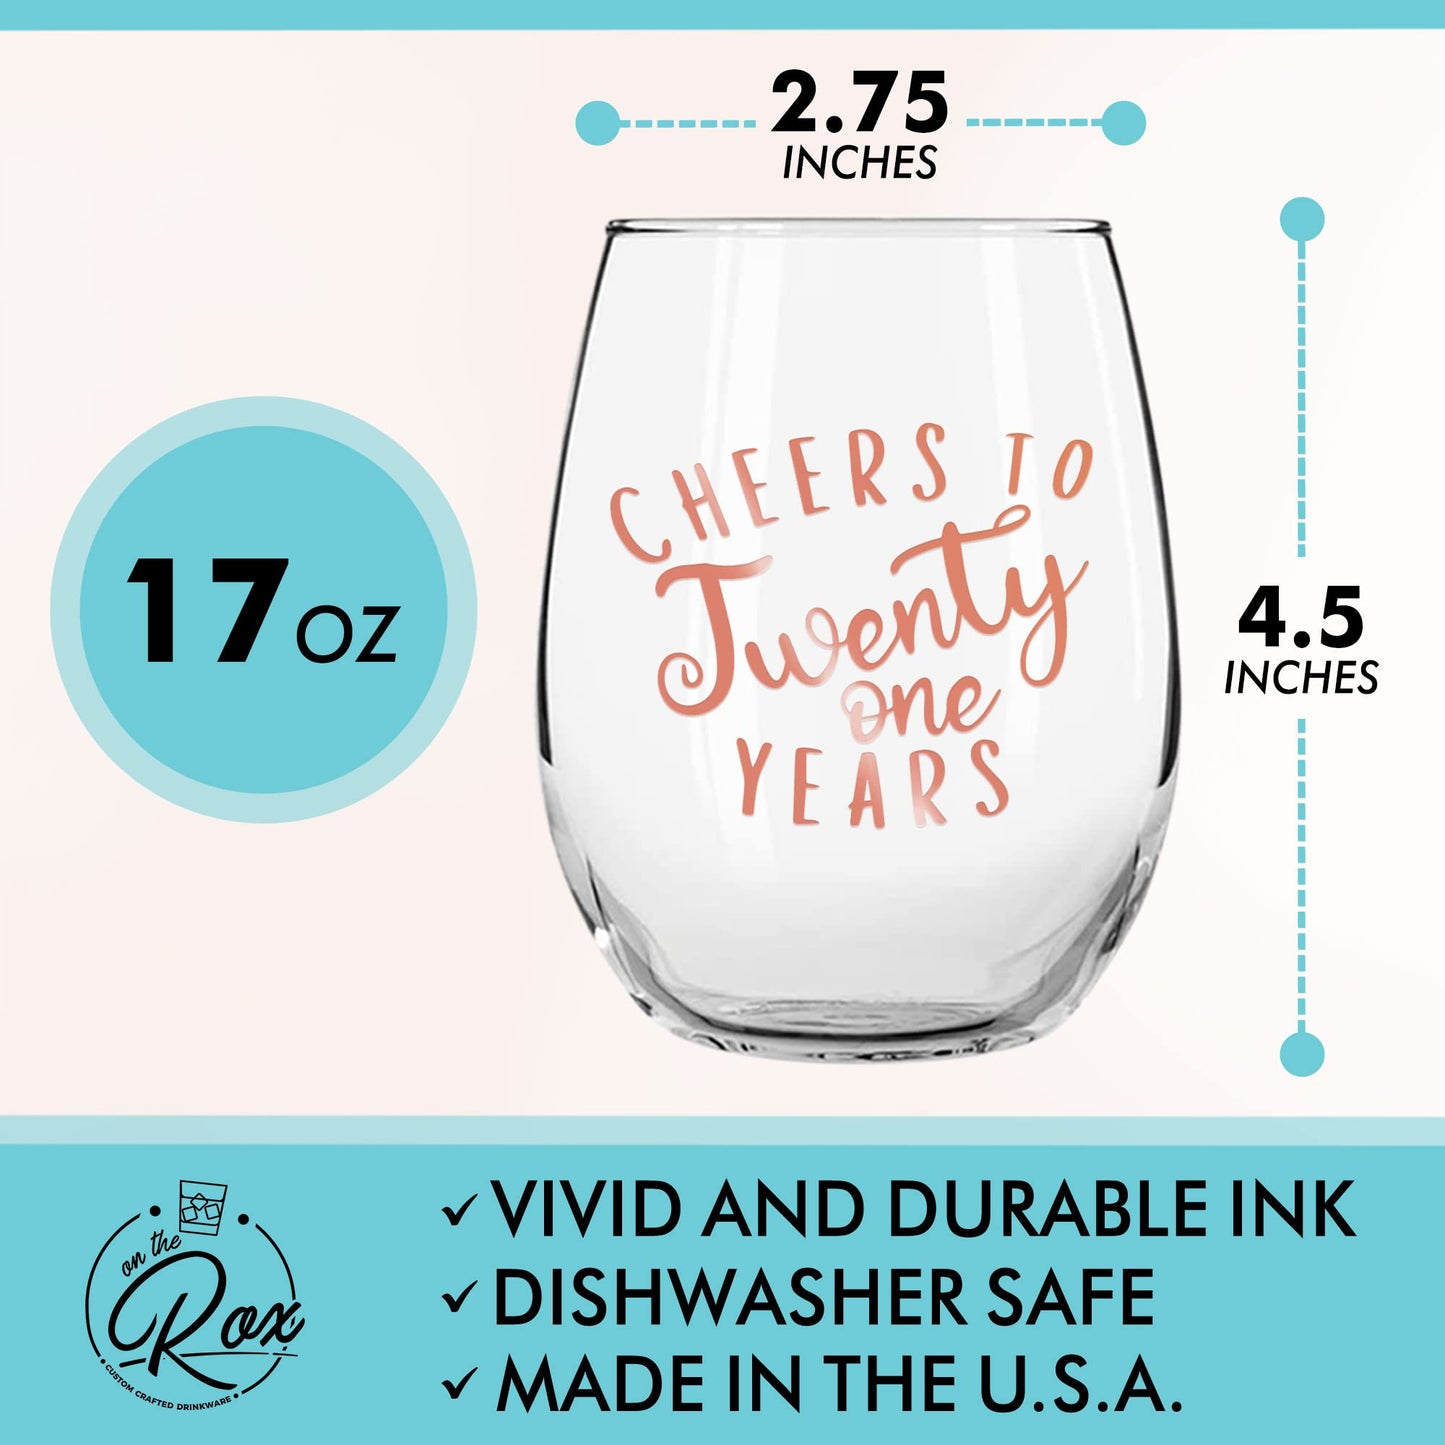 On The Rox Drinks 21st Birthday Stemless Wine Glass Gifts for Women - Cheers to 21 Years